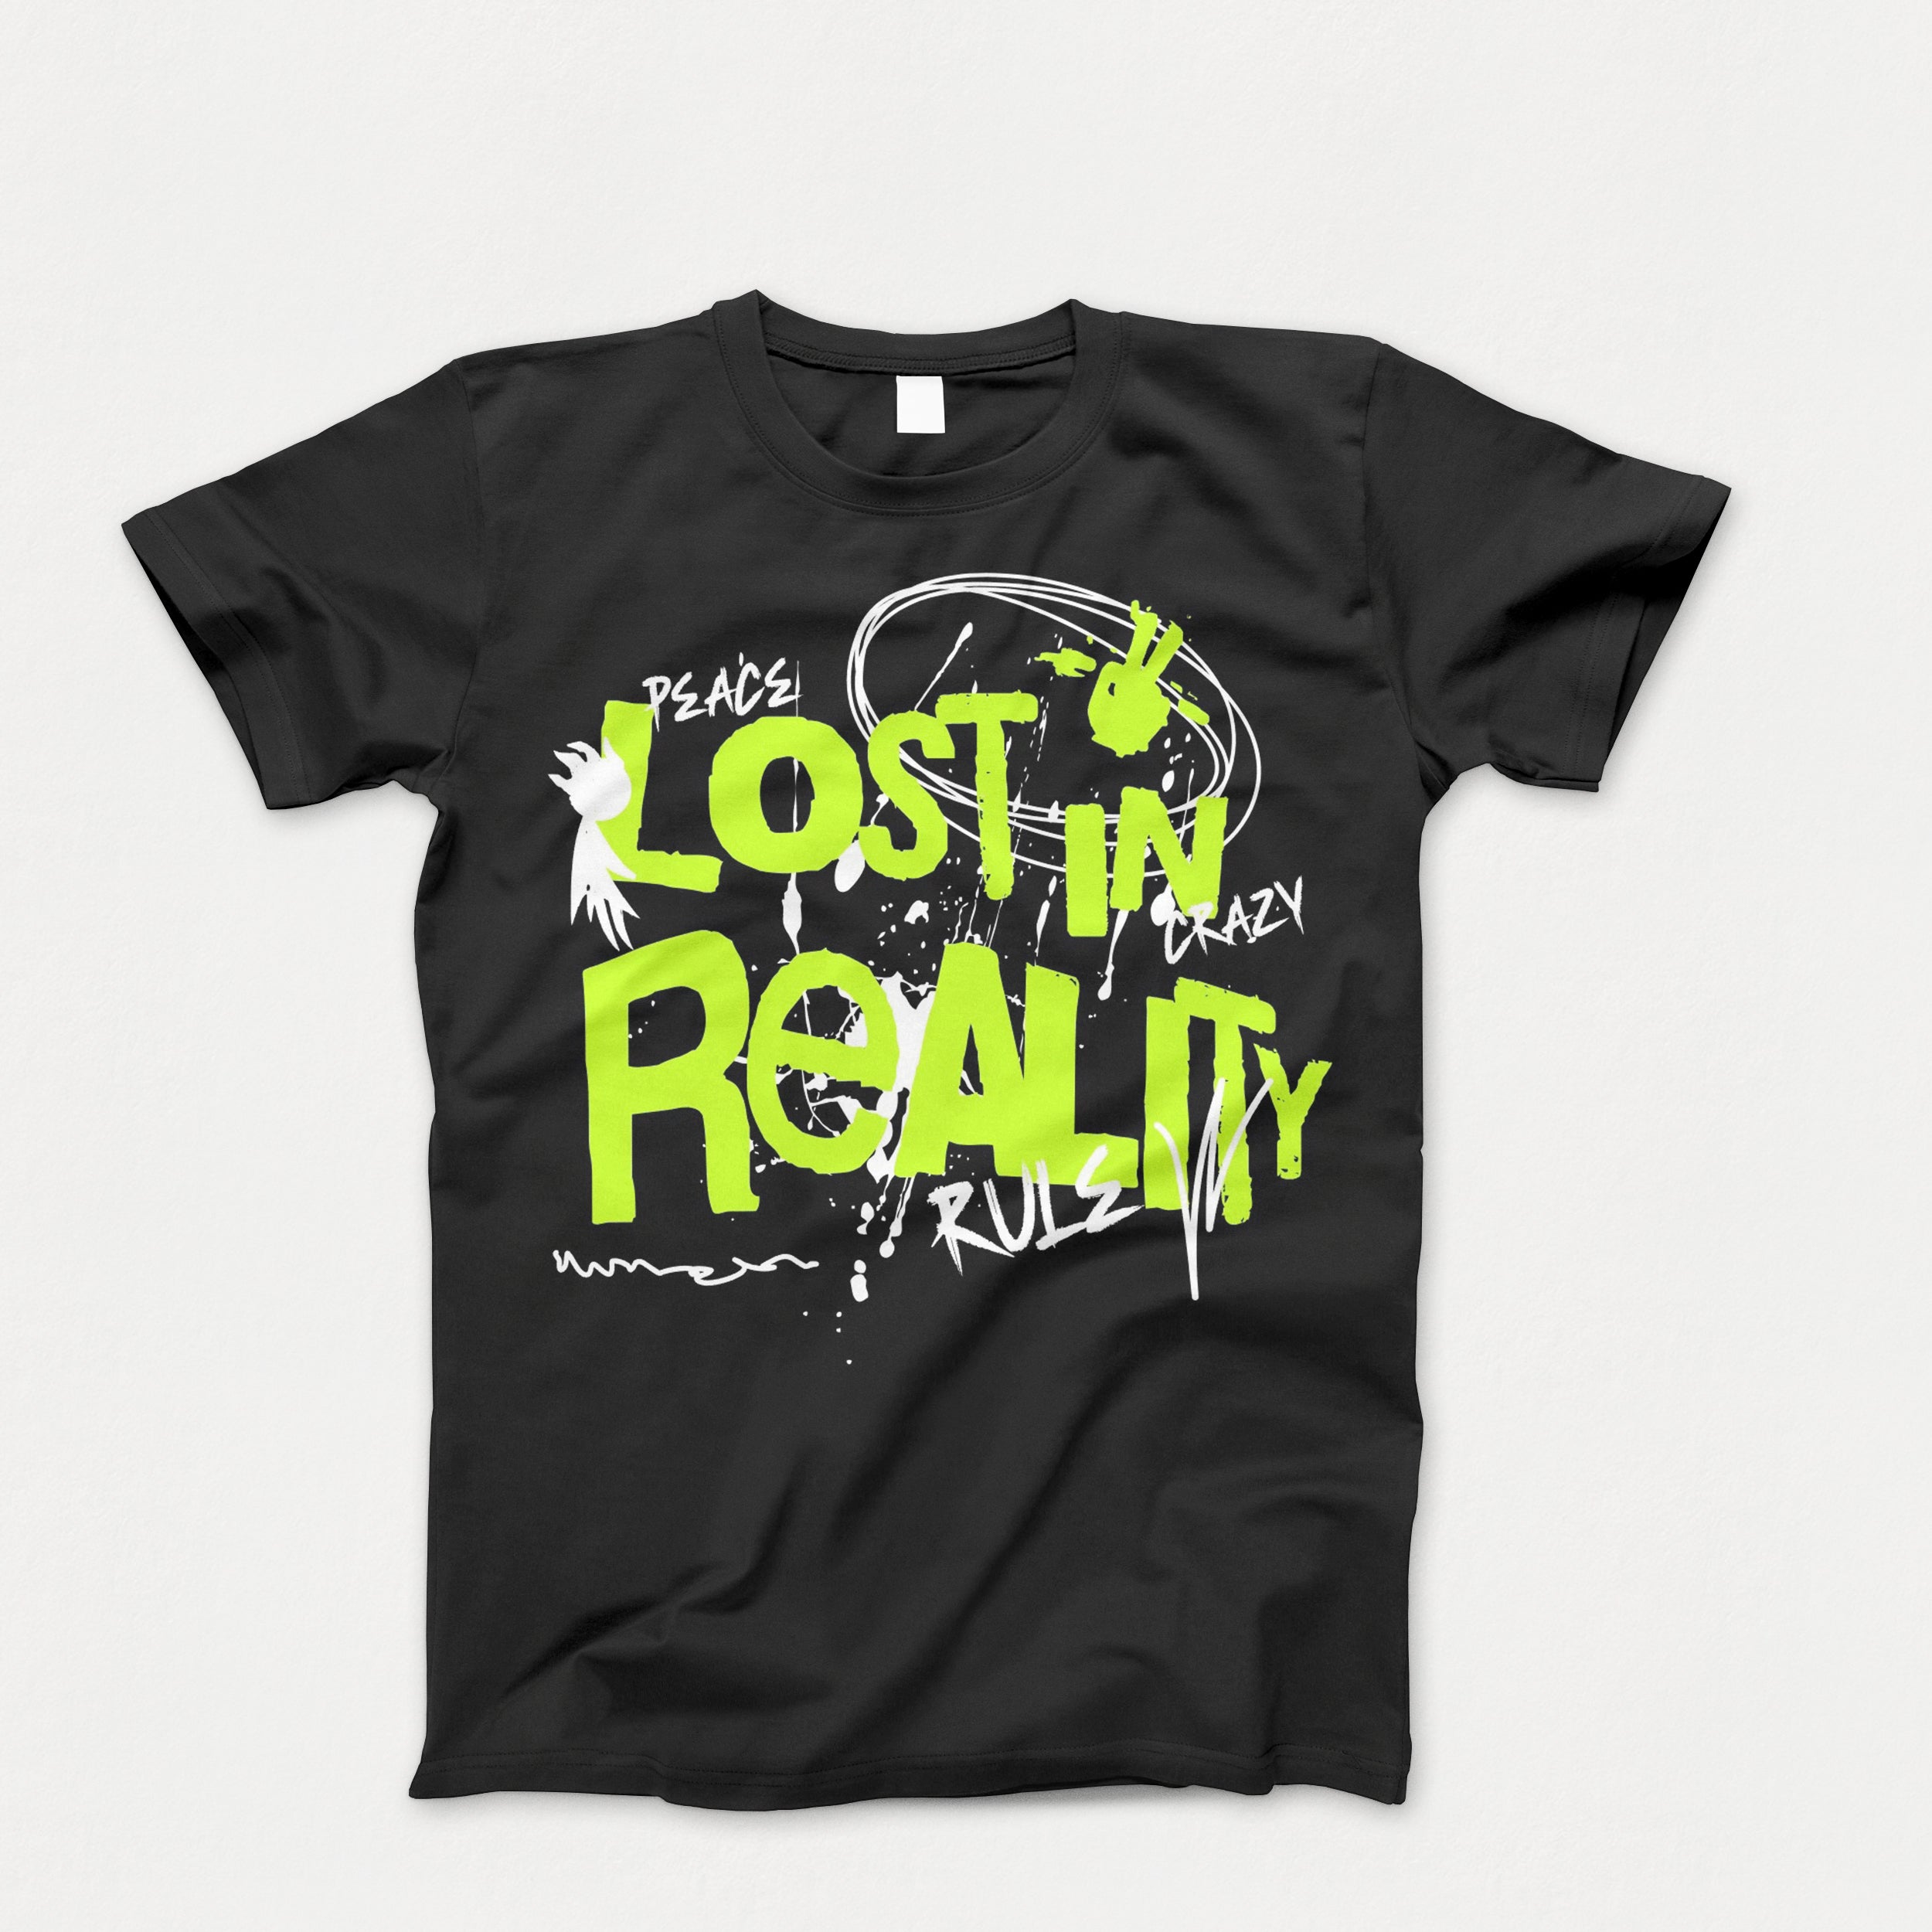 Unisex Adult Lost In Reality Tee Shirt